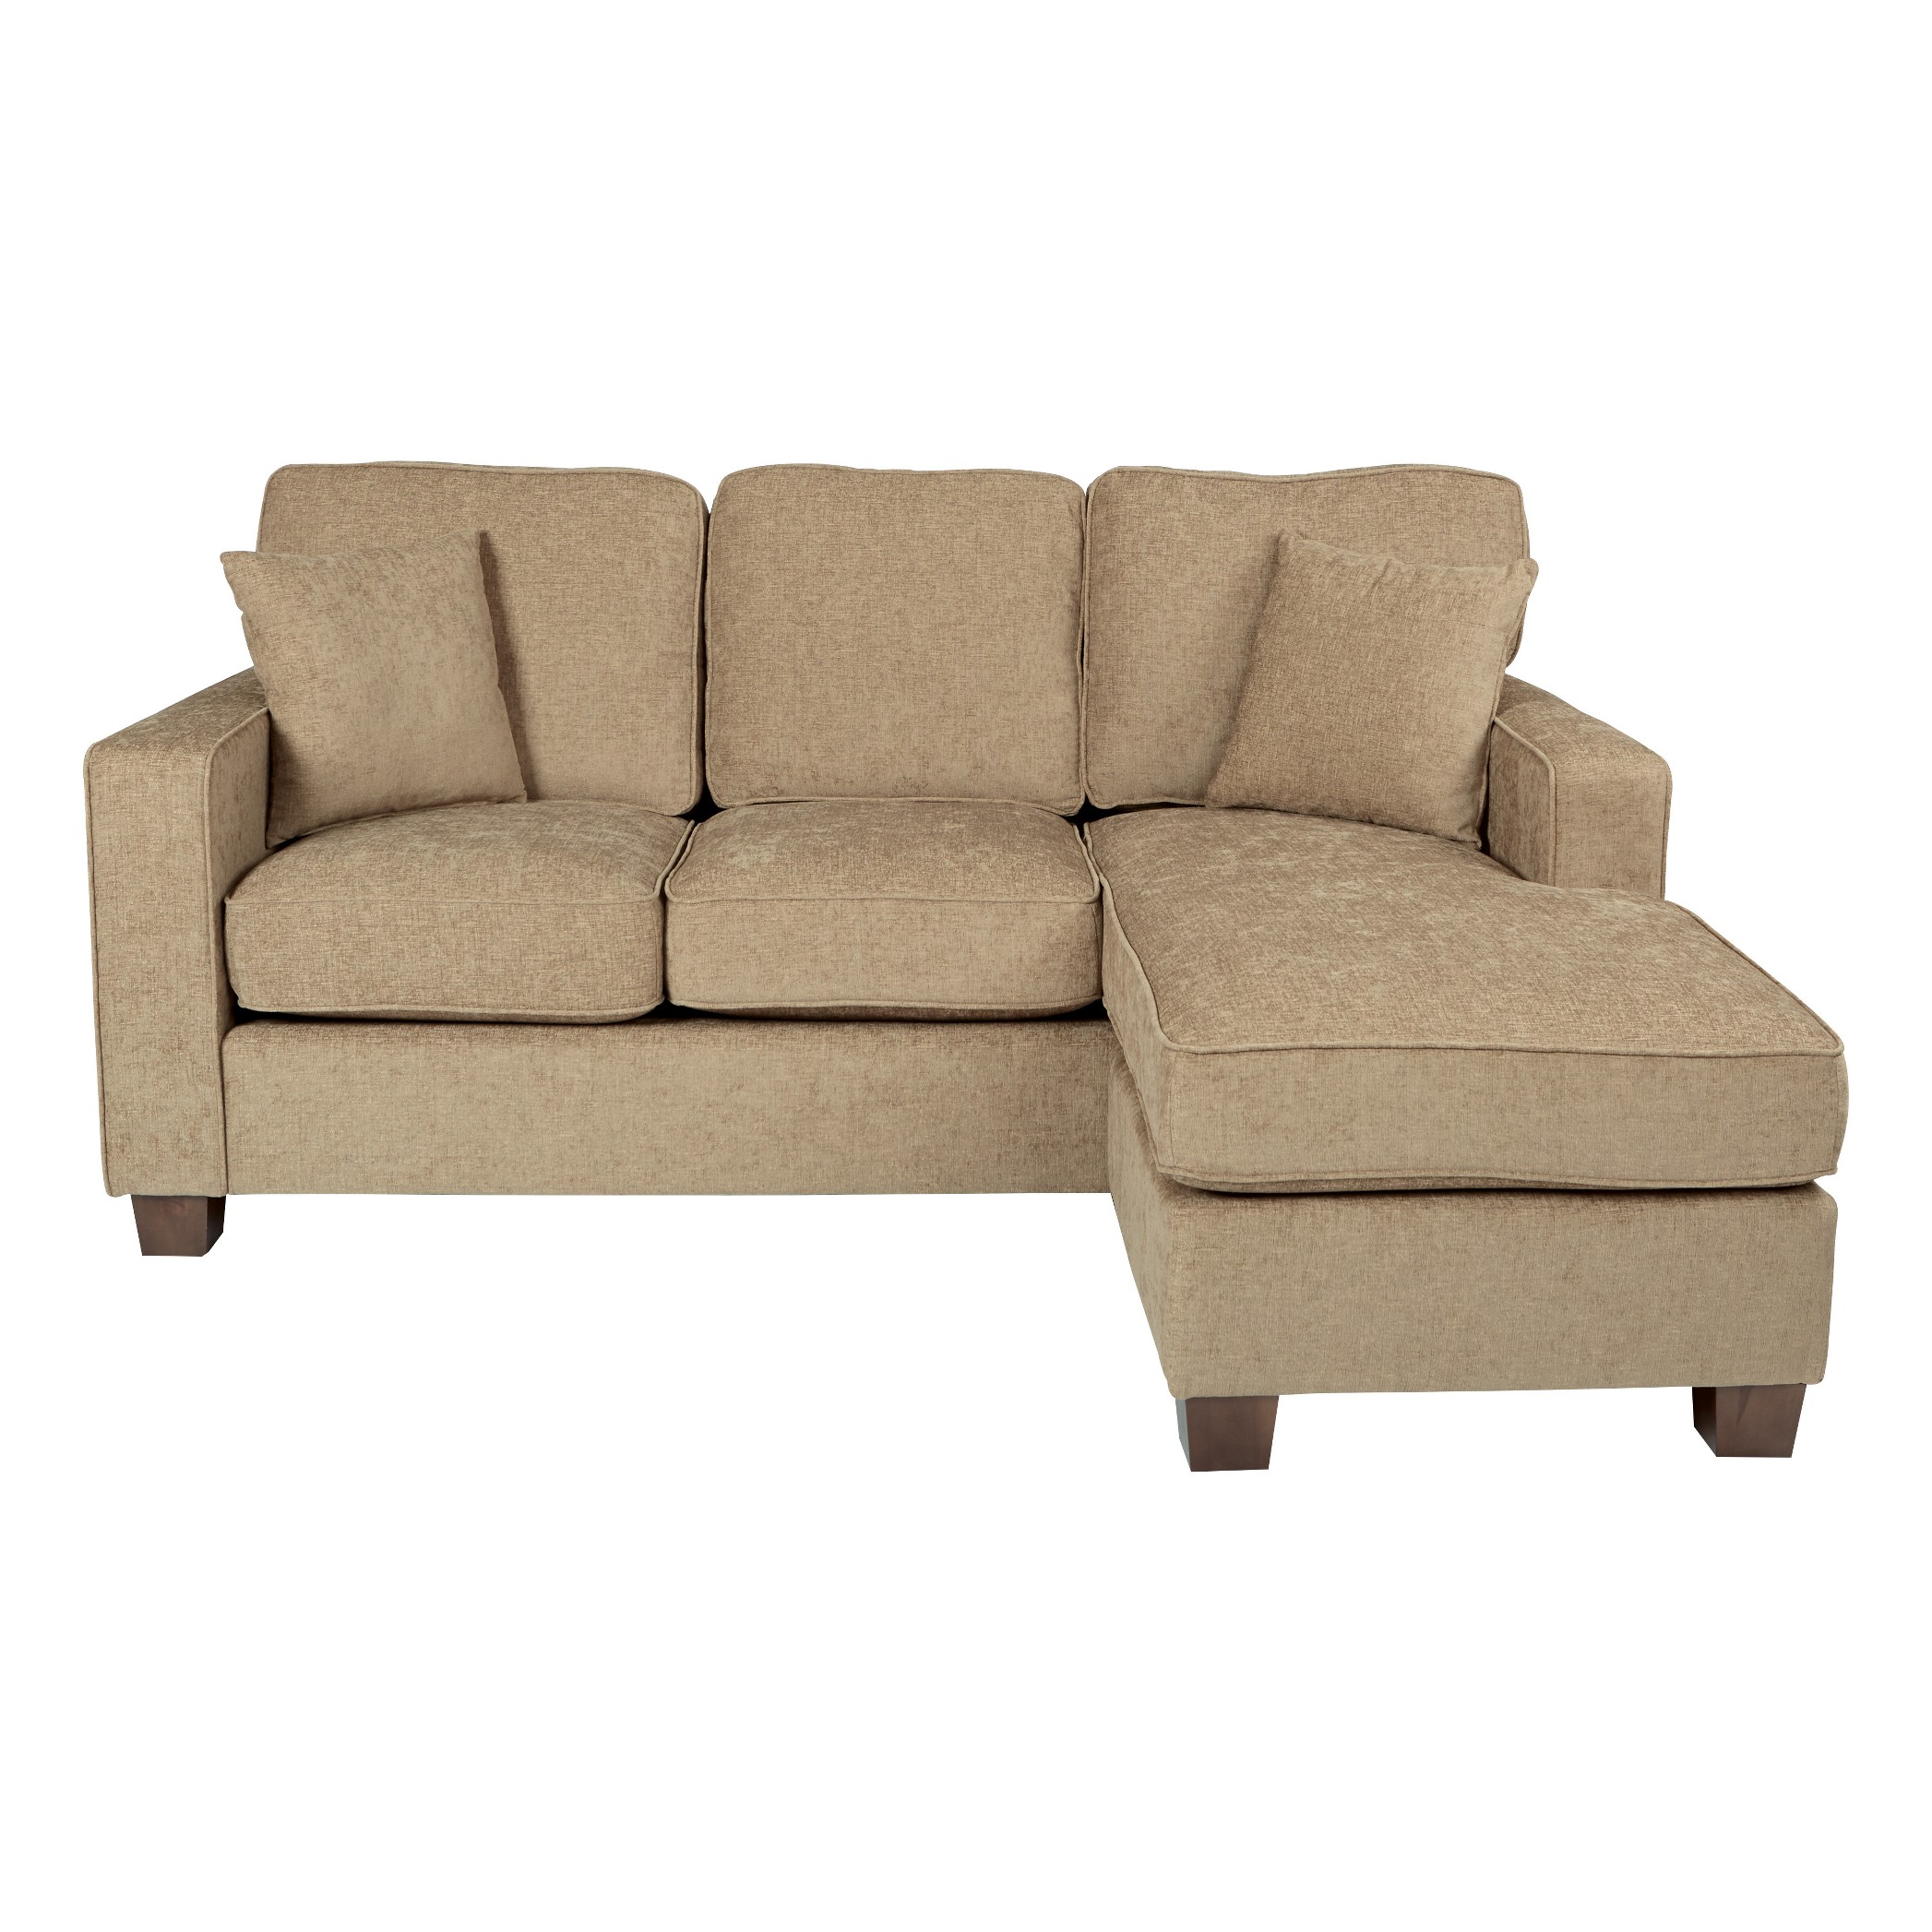 OSP Home Furnishings Russell Reversible Sectional Sofa with 2 Pillows & Coffee Finished Legs (Earth)